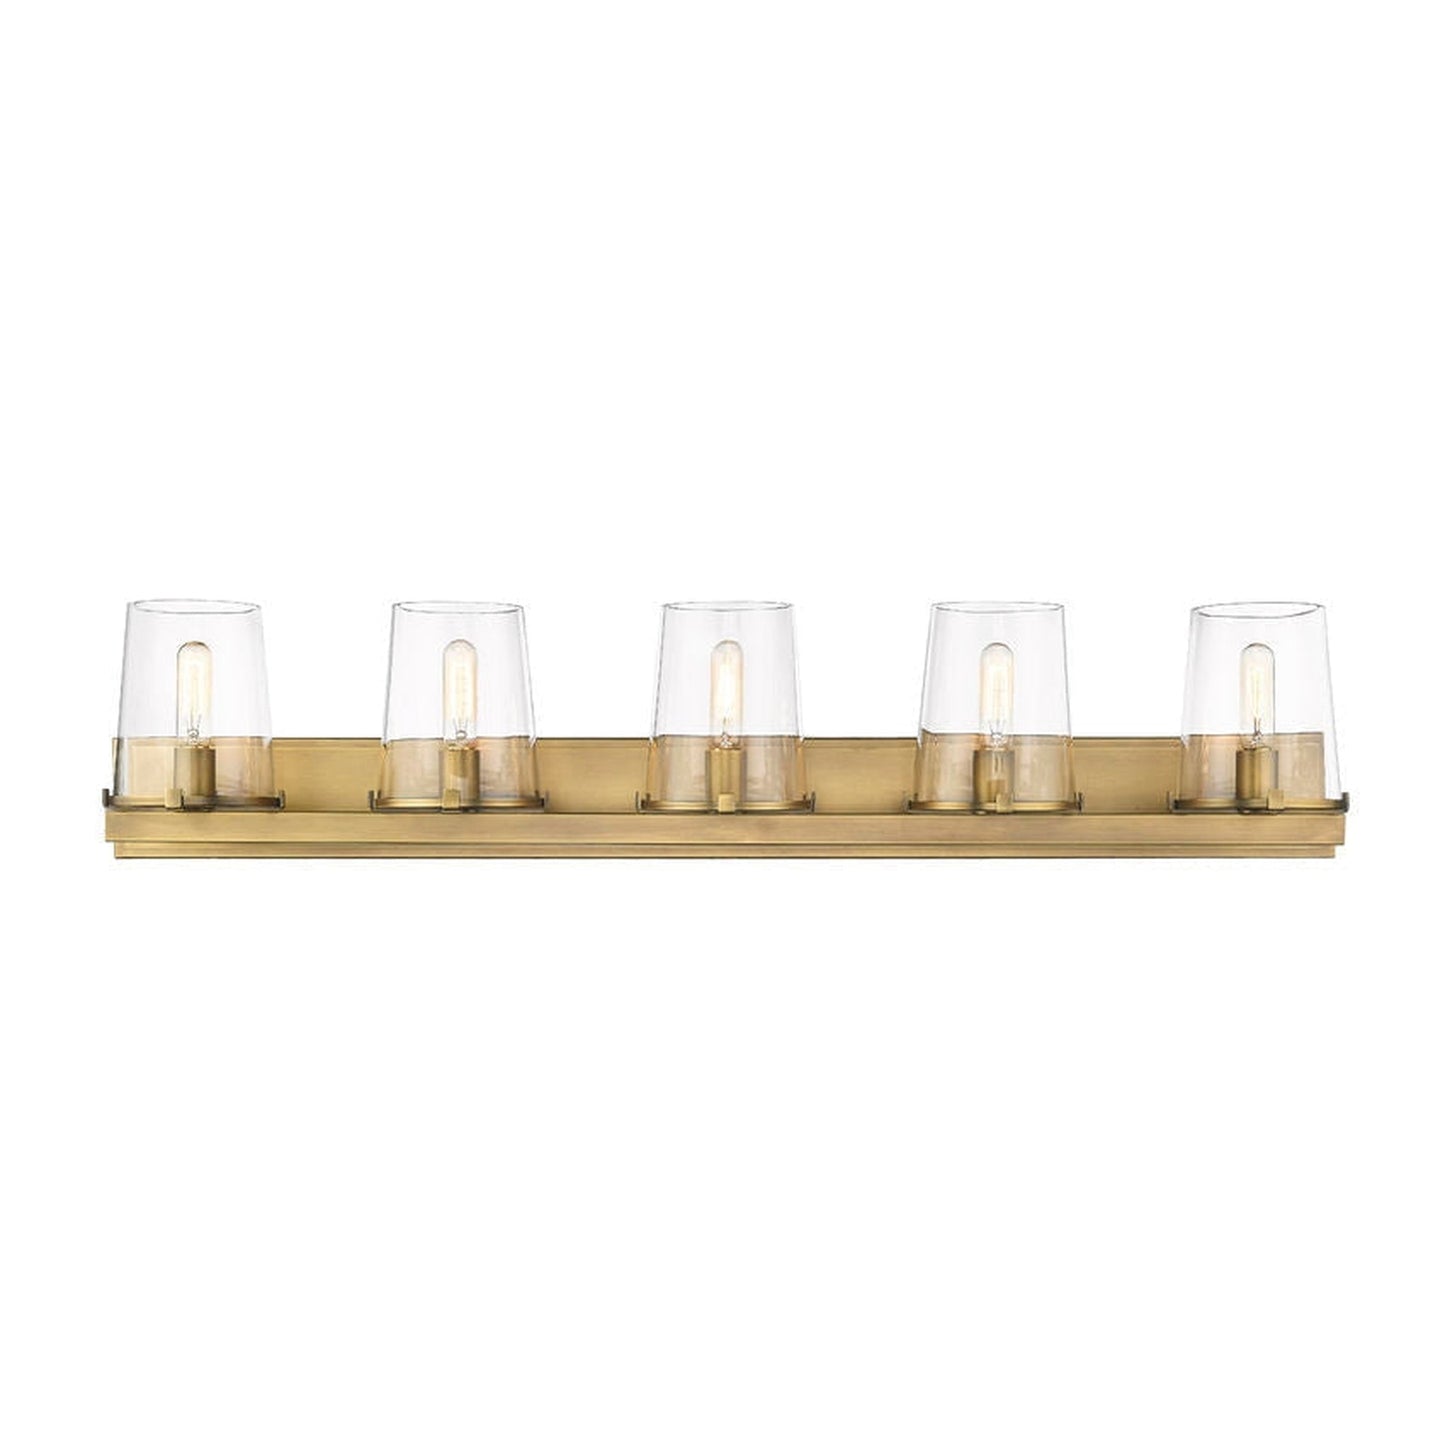 Z-Lite Callista 47" 5-Light Rubbed Brass Vanity Light With Clear Glass Shade